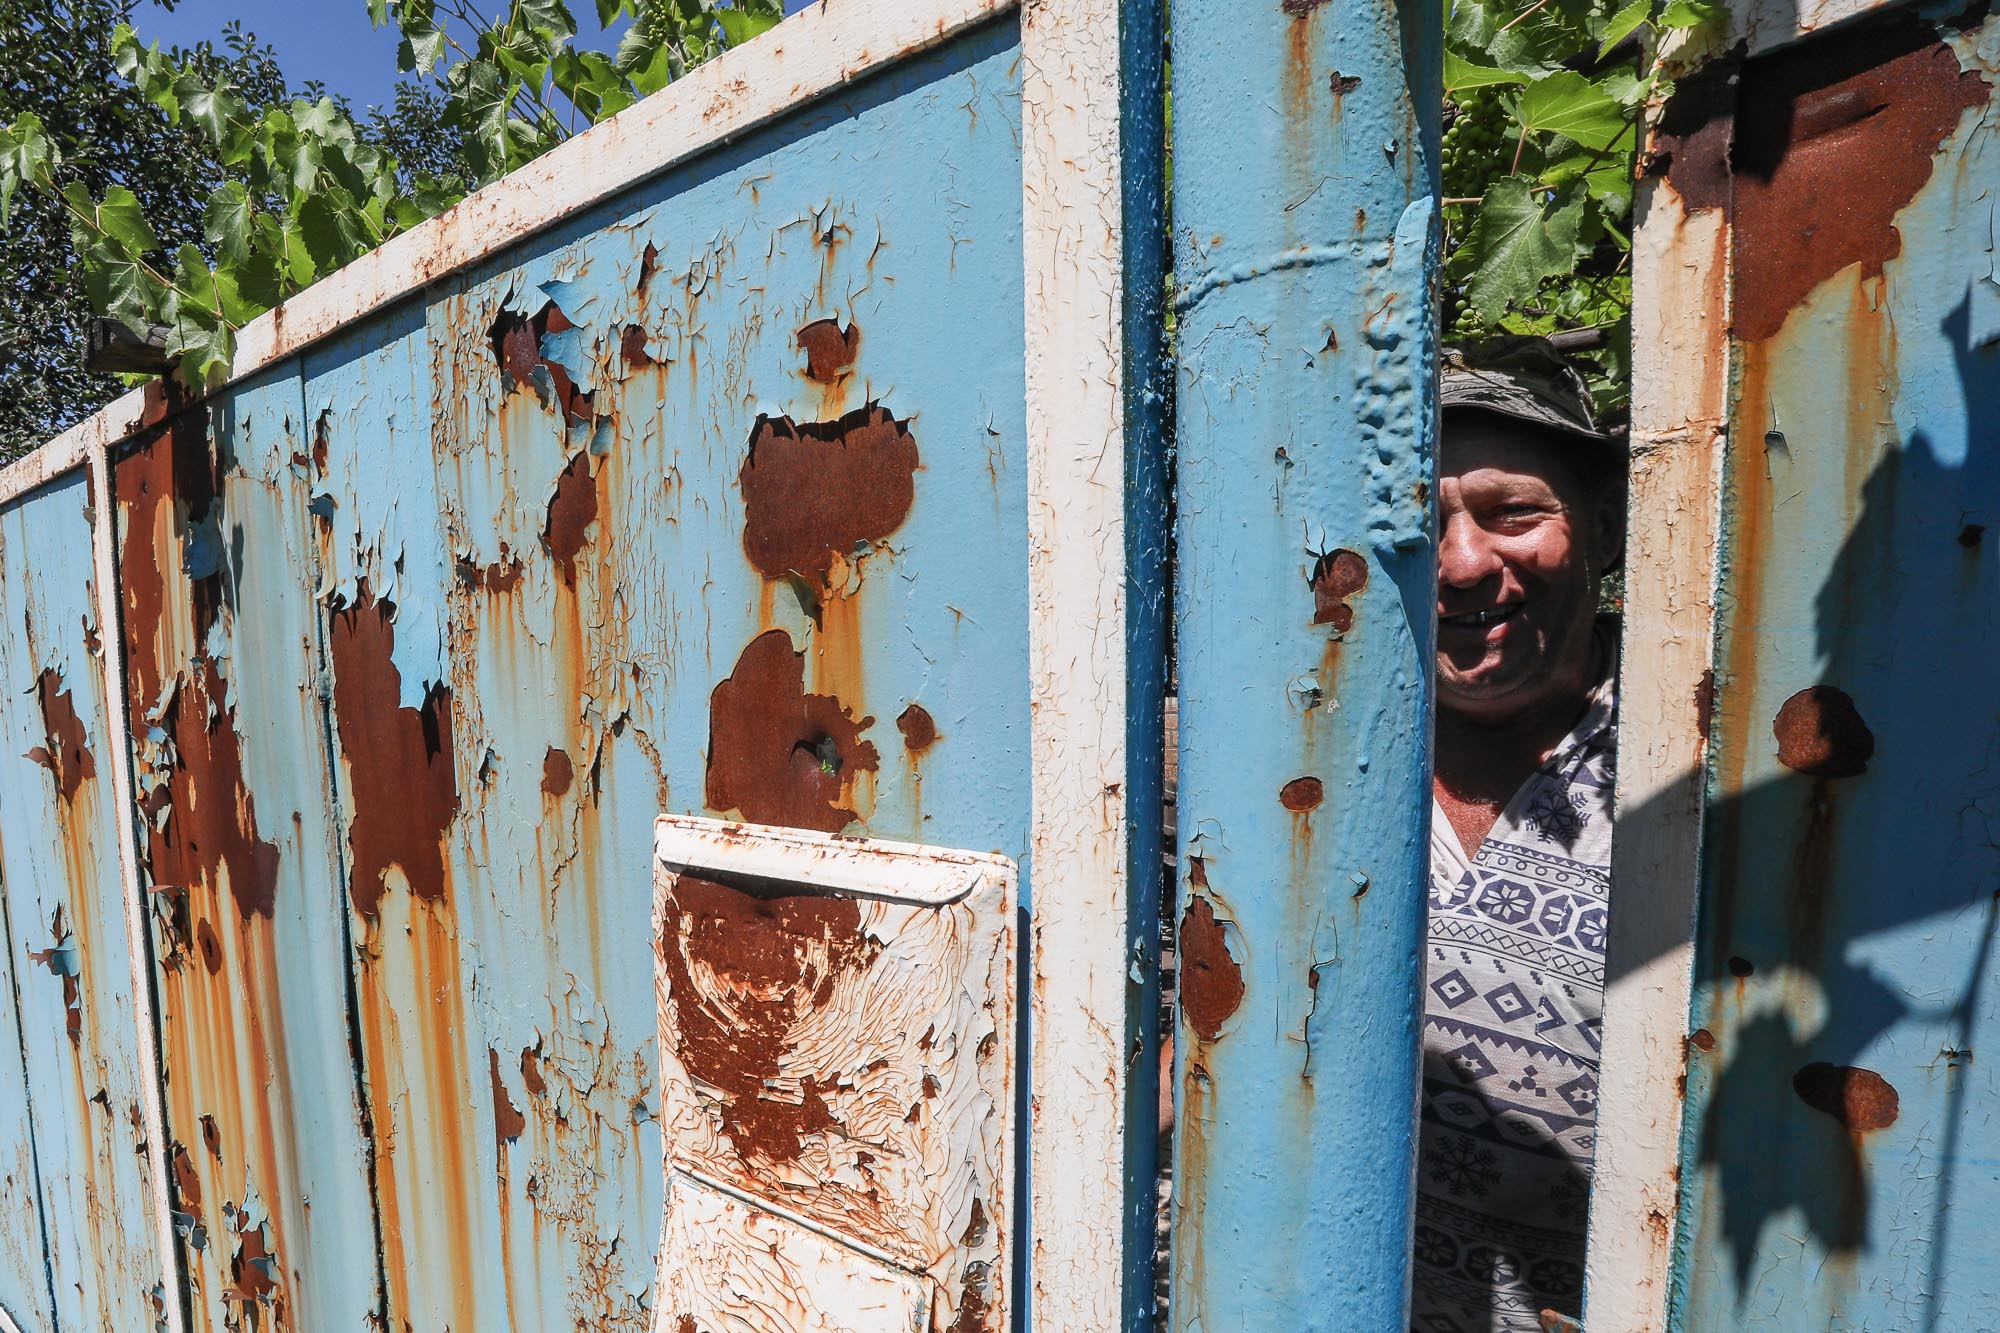 A Ukrainian civilian peeps out from behind a wicket in the town of Zaitseve on June 25